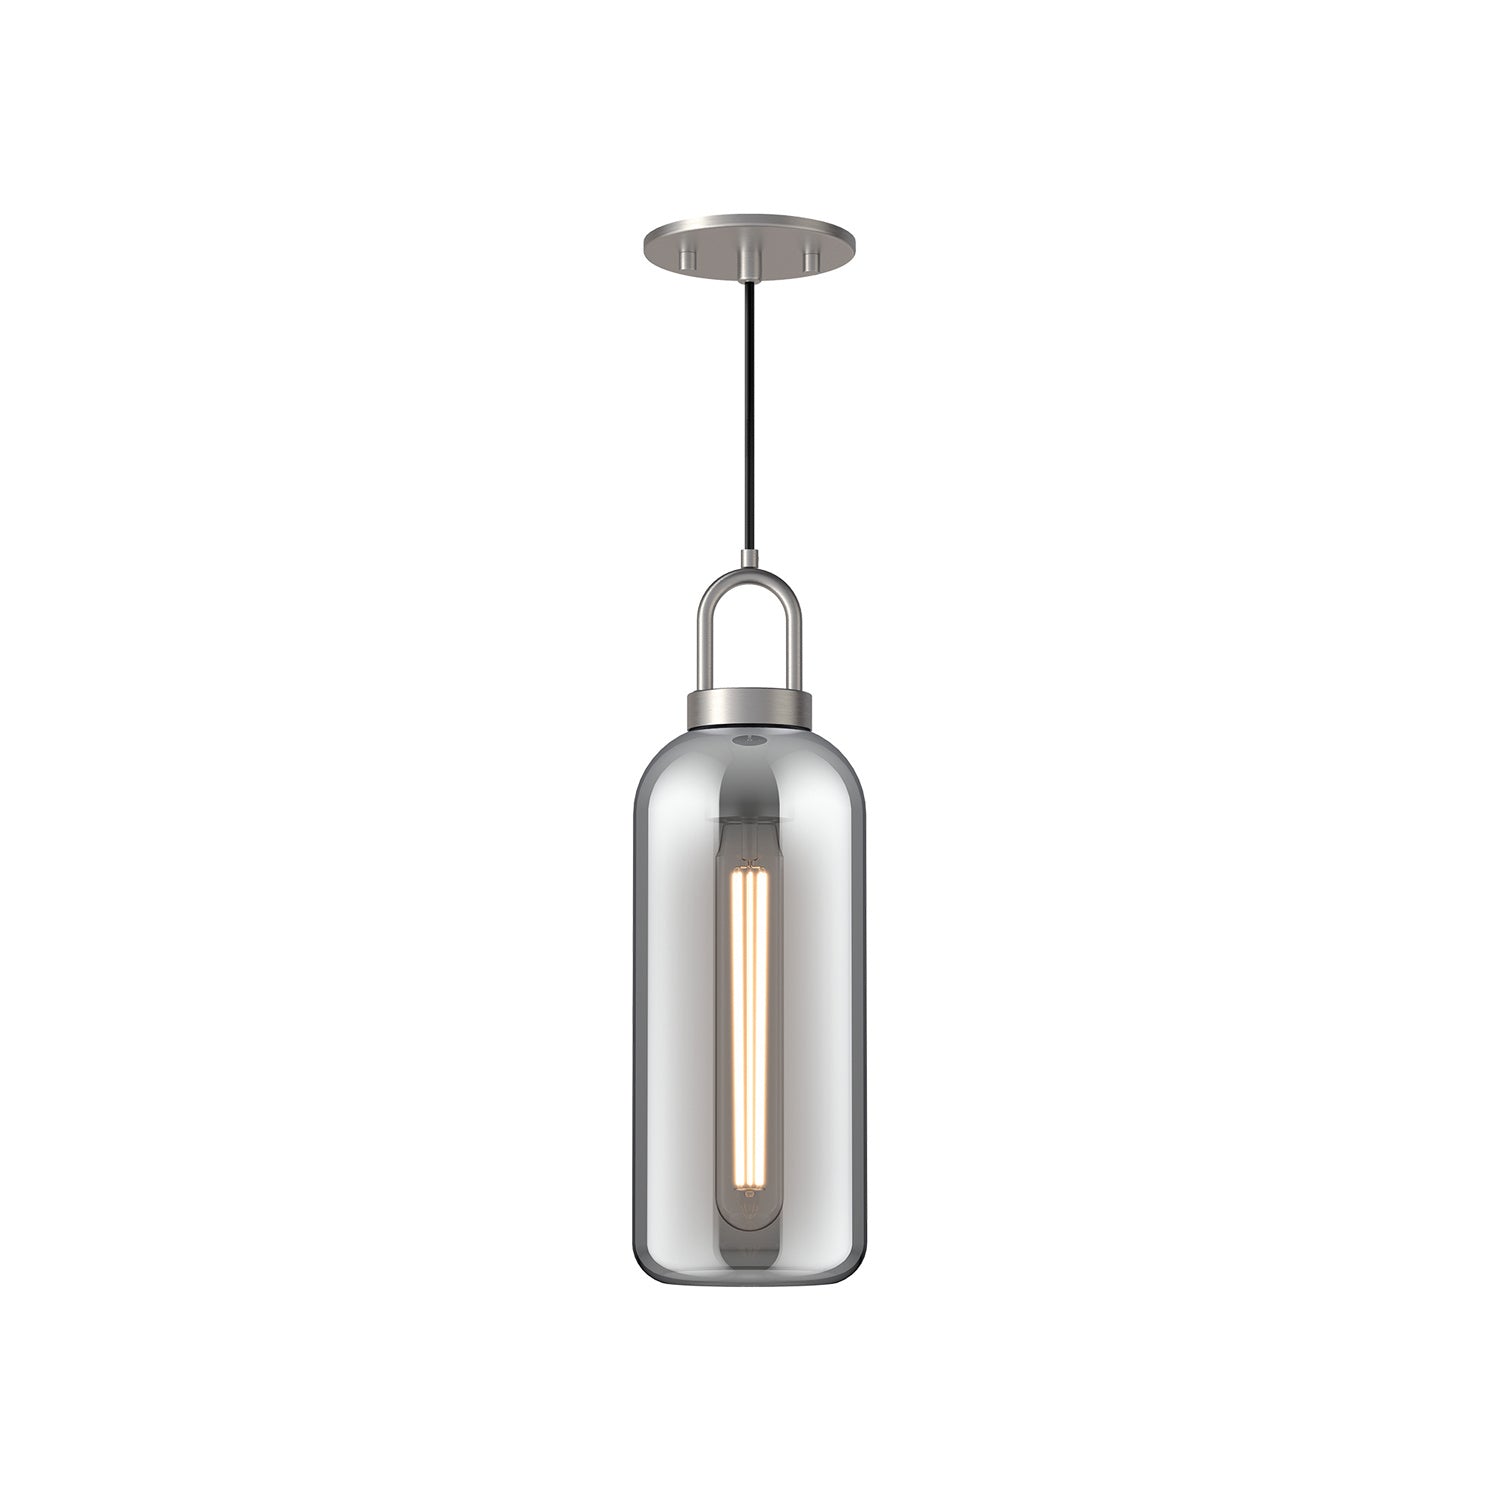 Alora - PD401505BNSM - One Light Pendant - Soji - Brushed Nickel/Smoked Solid Glass